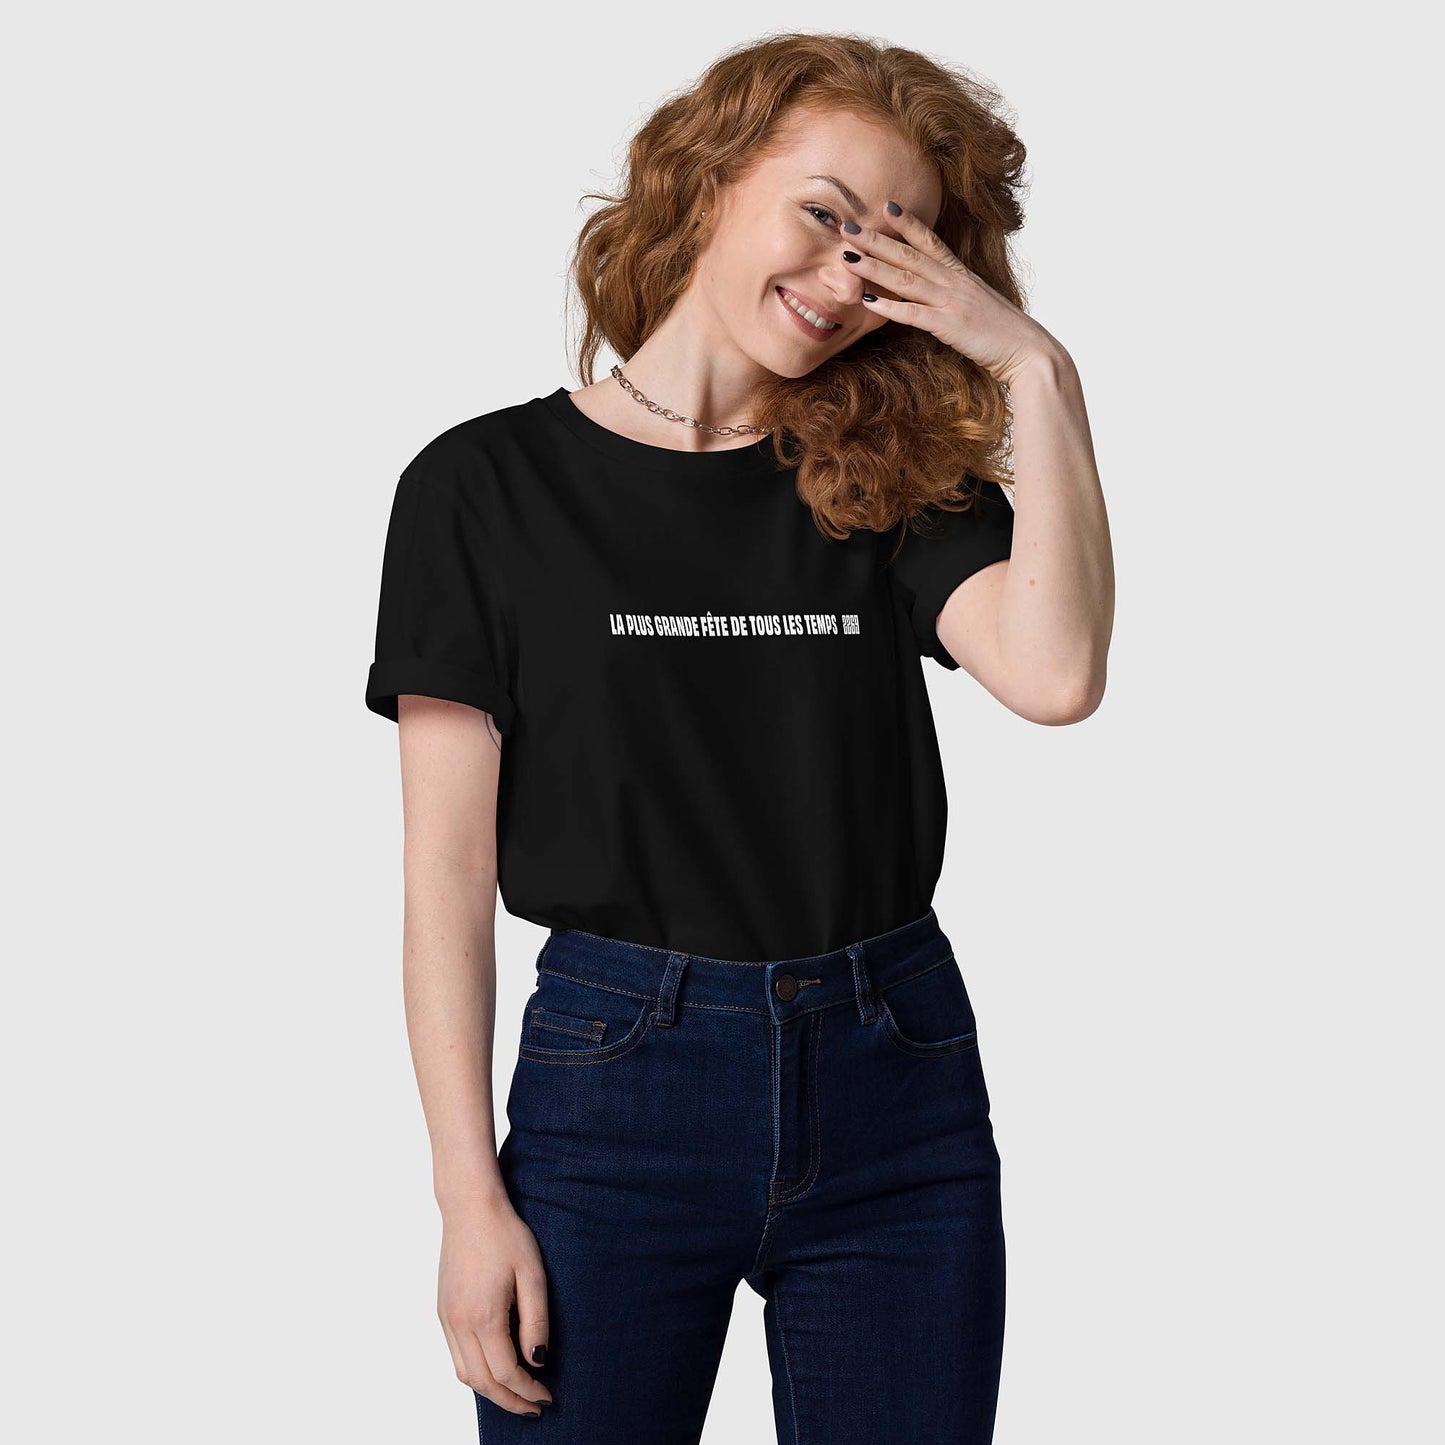 Unisex black organic cotton t-shirt with French 2269 party message